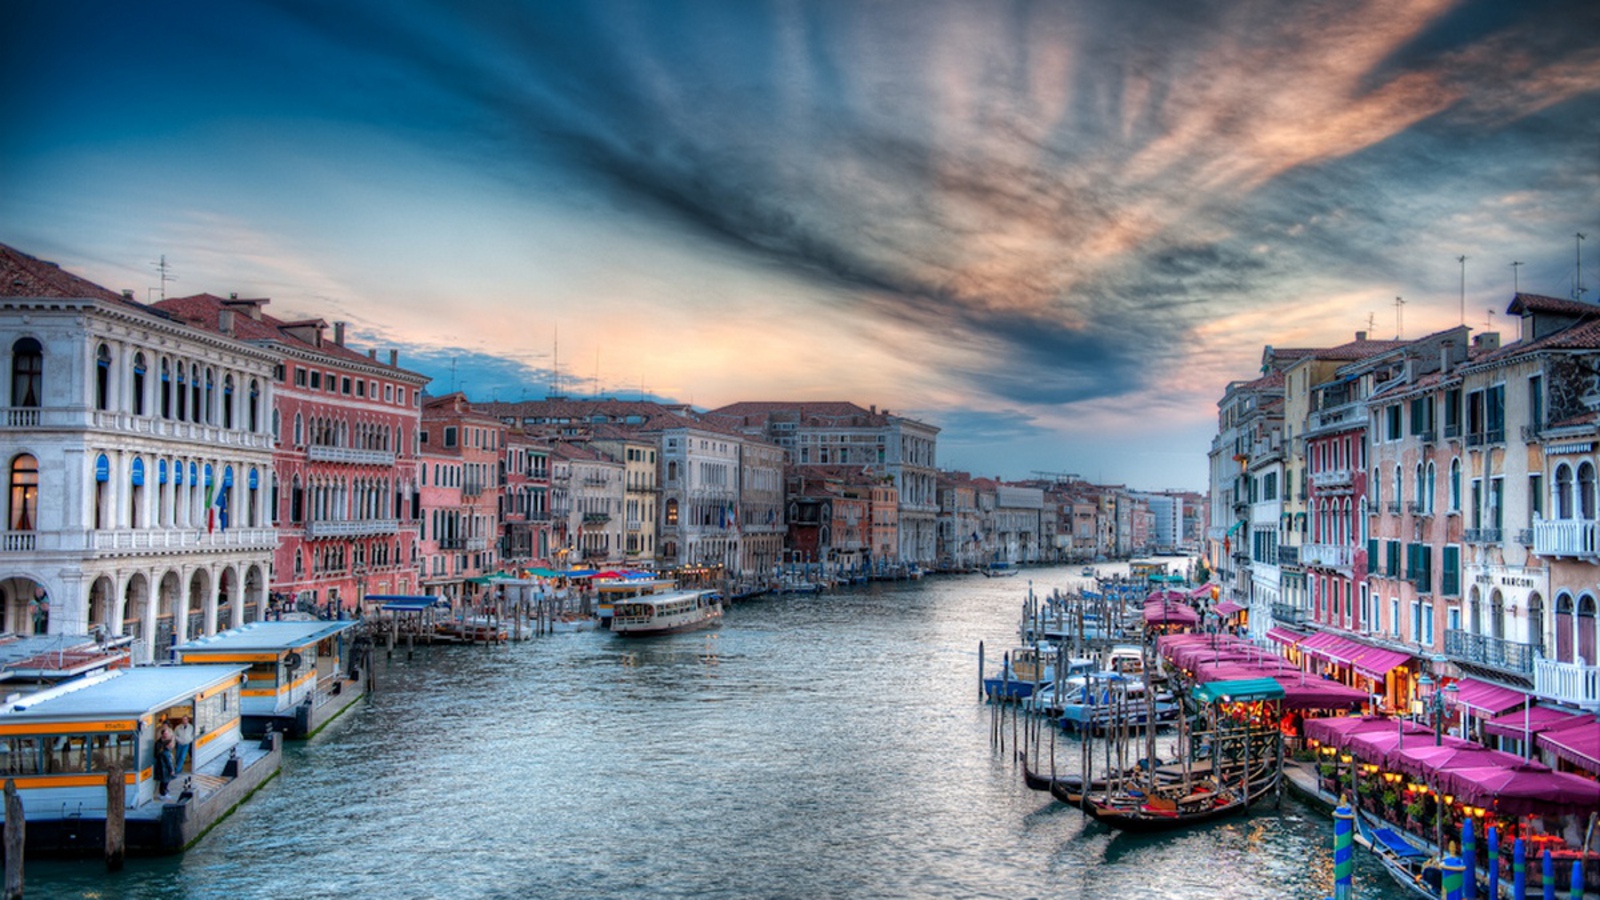 hdr, man made, venice, building, italy, cities